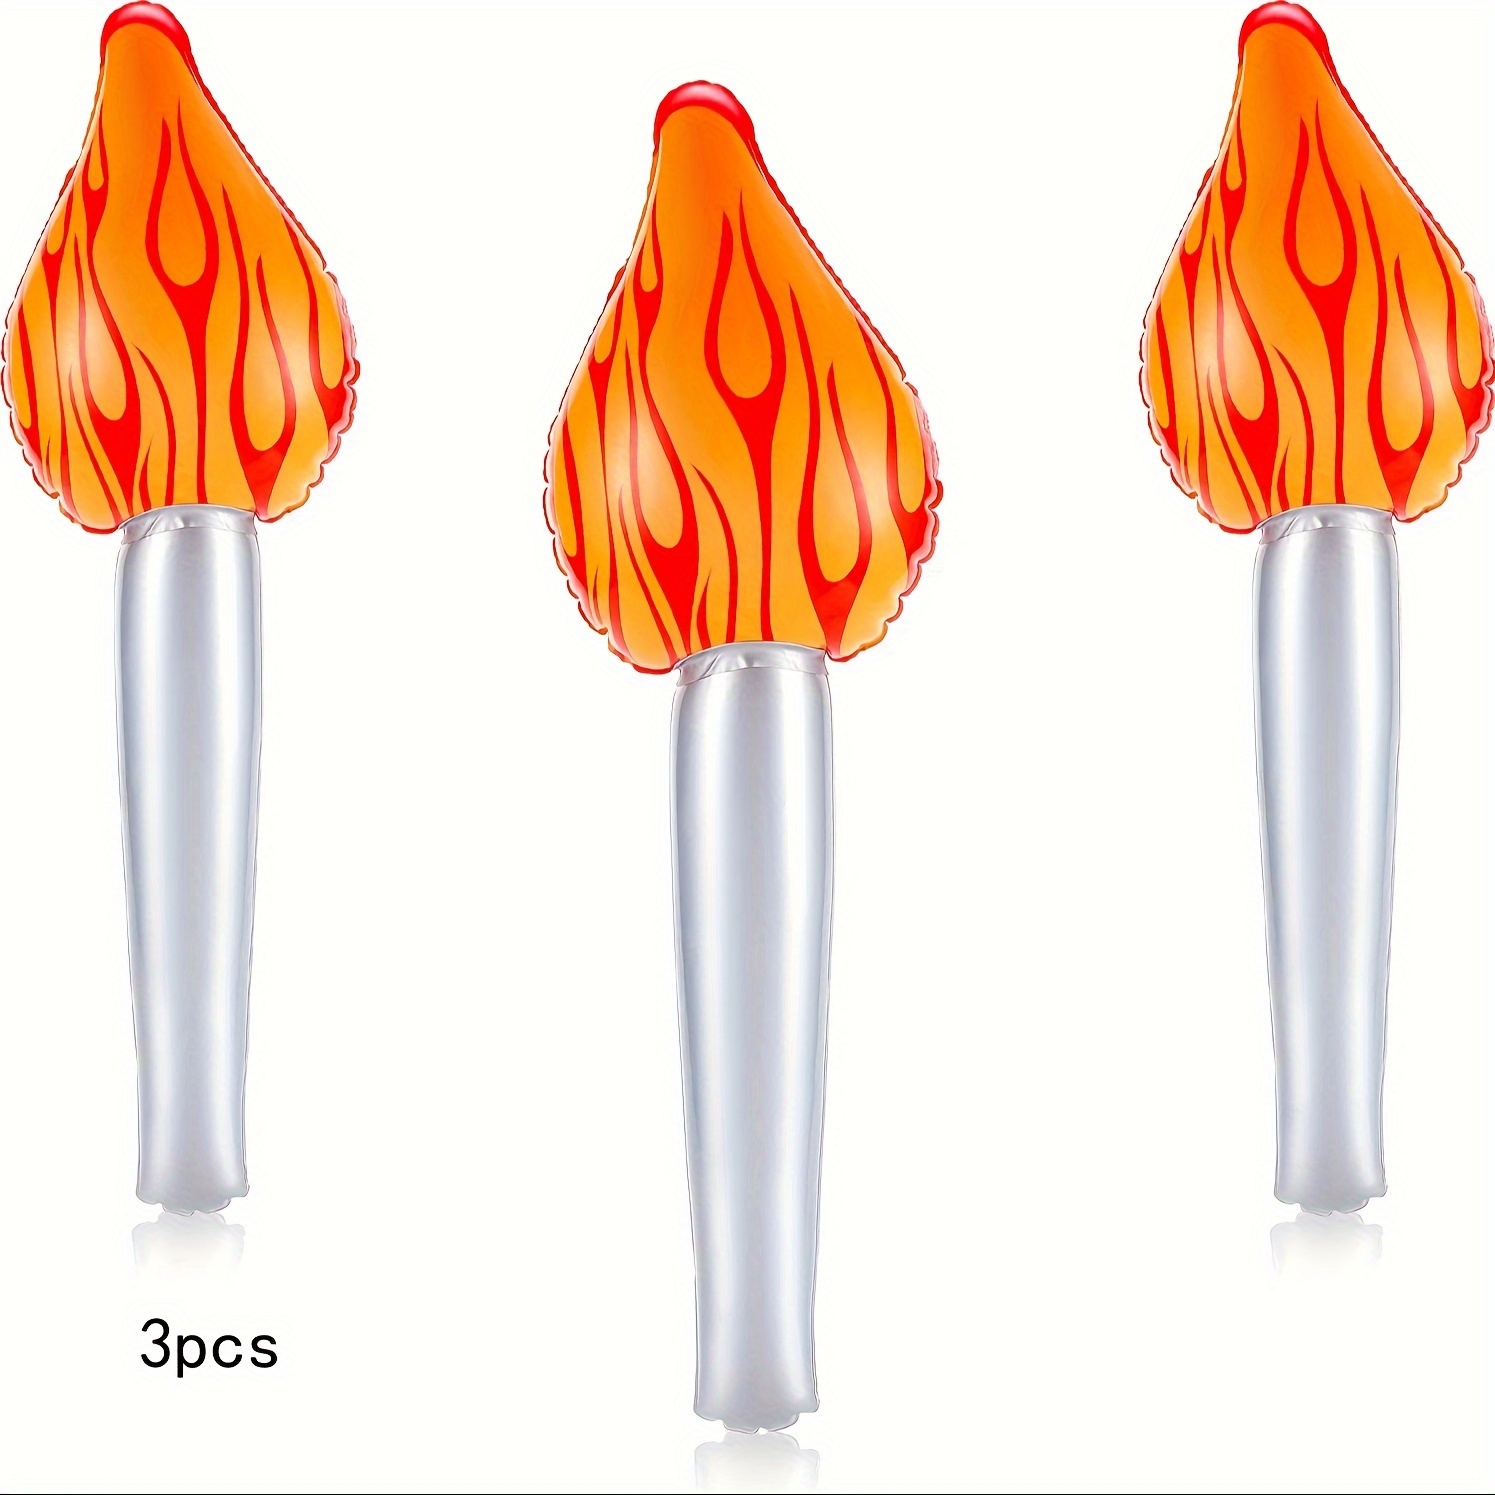 

3-piece Inflatable Torch Balloons - Fun Flashing Light-up Decor For Sports Events, Hawaiian Theme Parties & Festive Celebrations